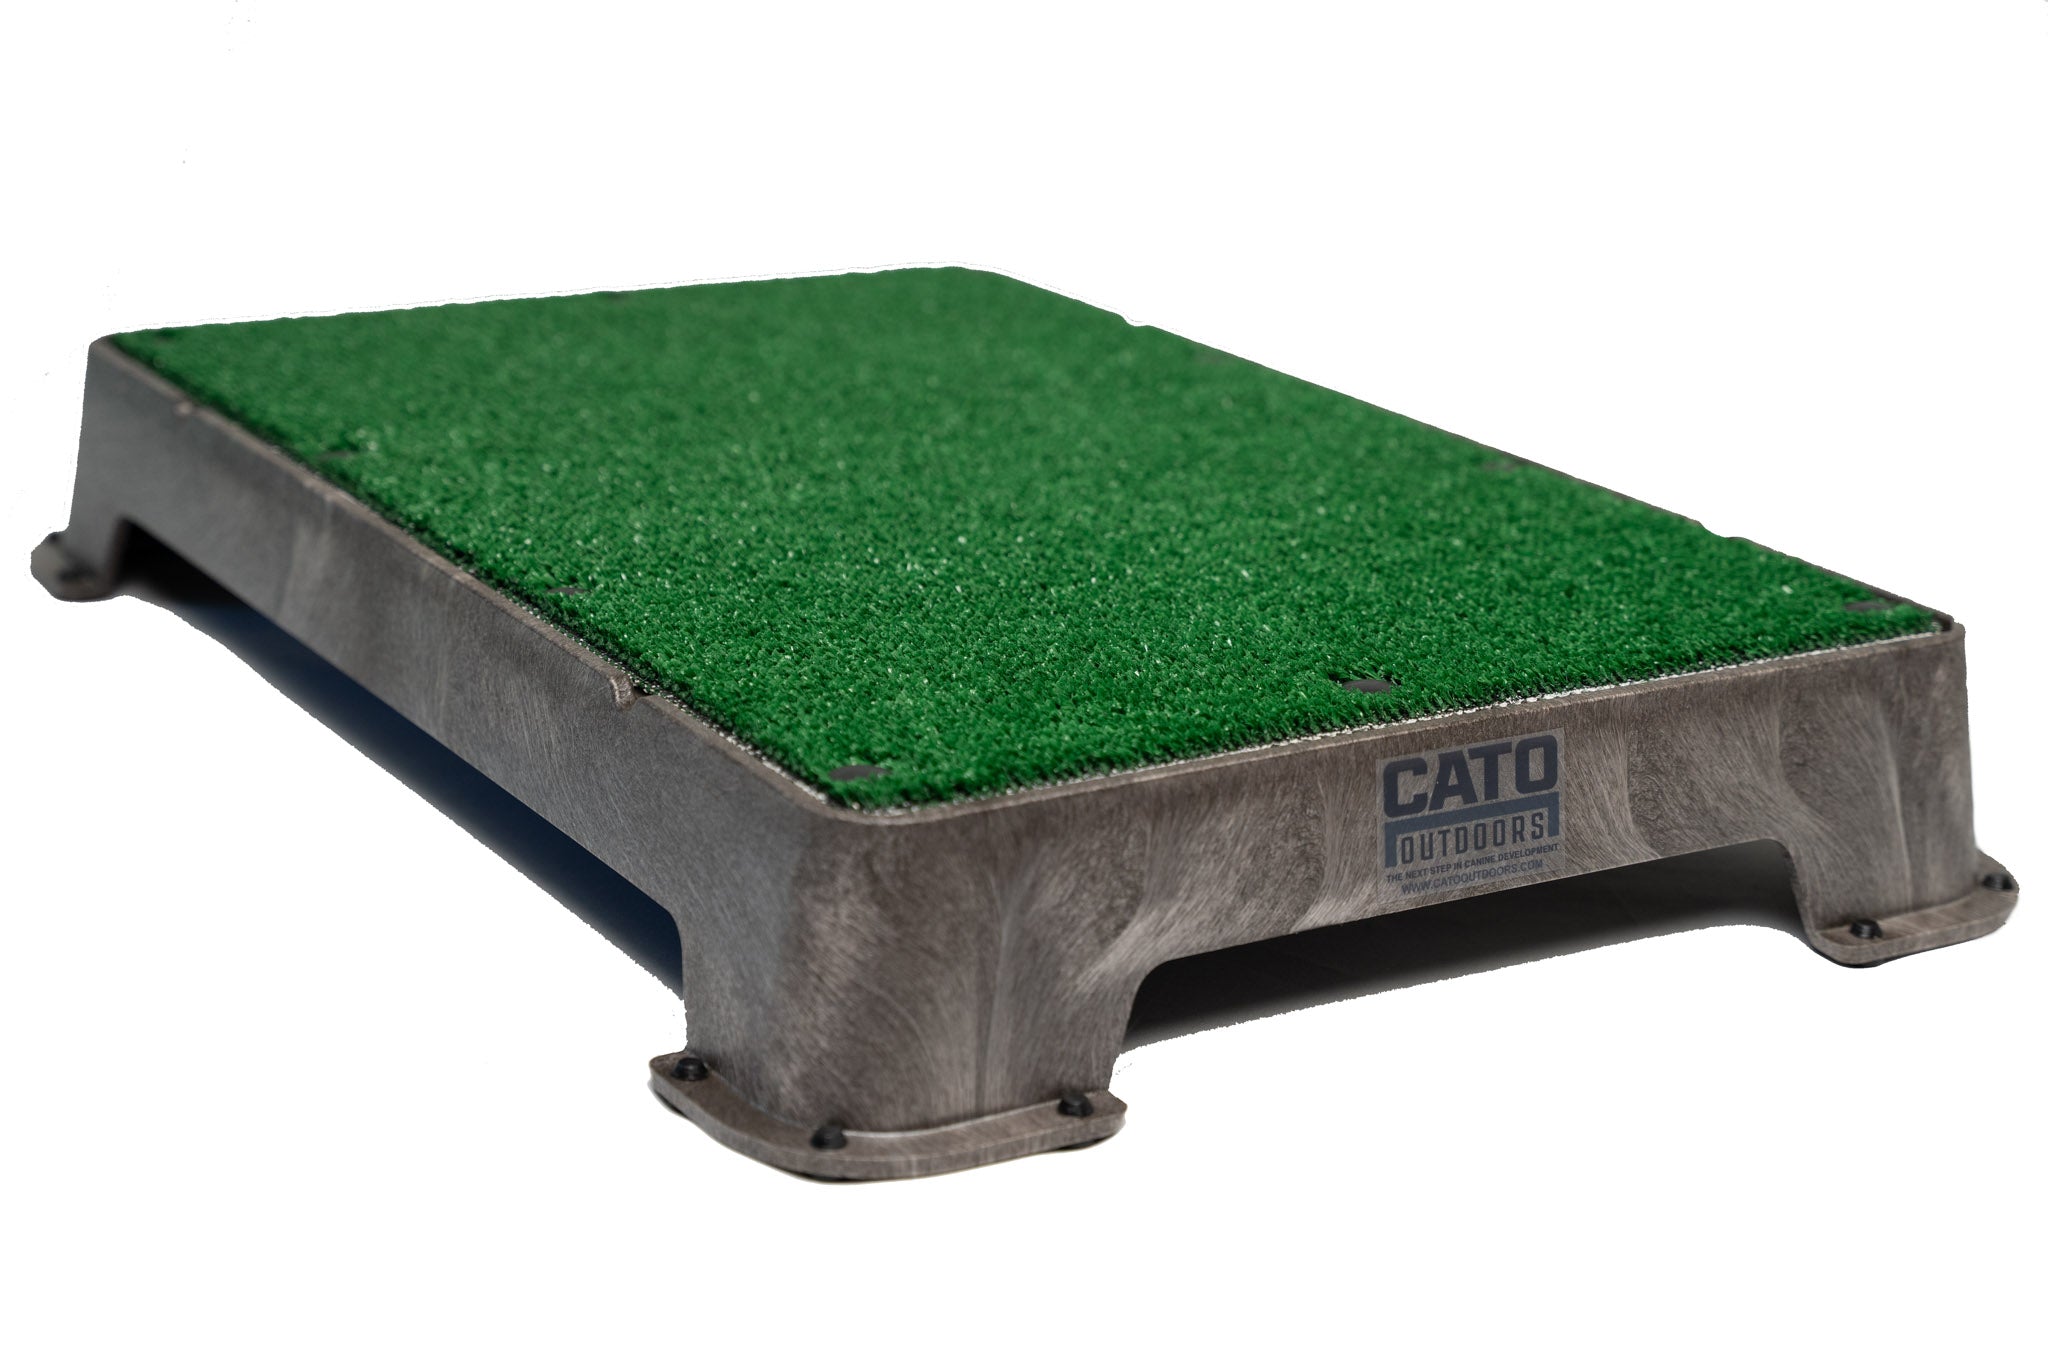 Cato Board - Dog Training Platform - Made in The USA (Olive Green, Rubber Surface)